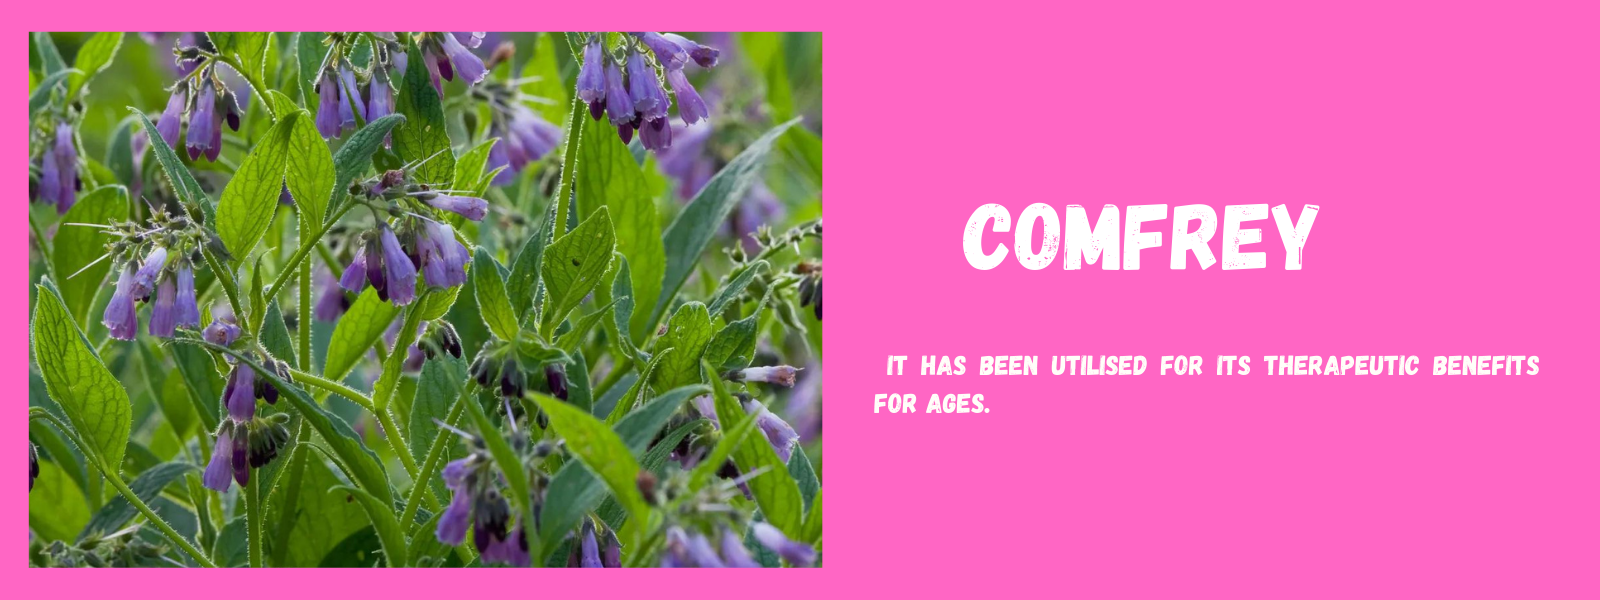 Comfrey: Health Benefits, Uses and Important Facts